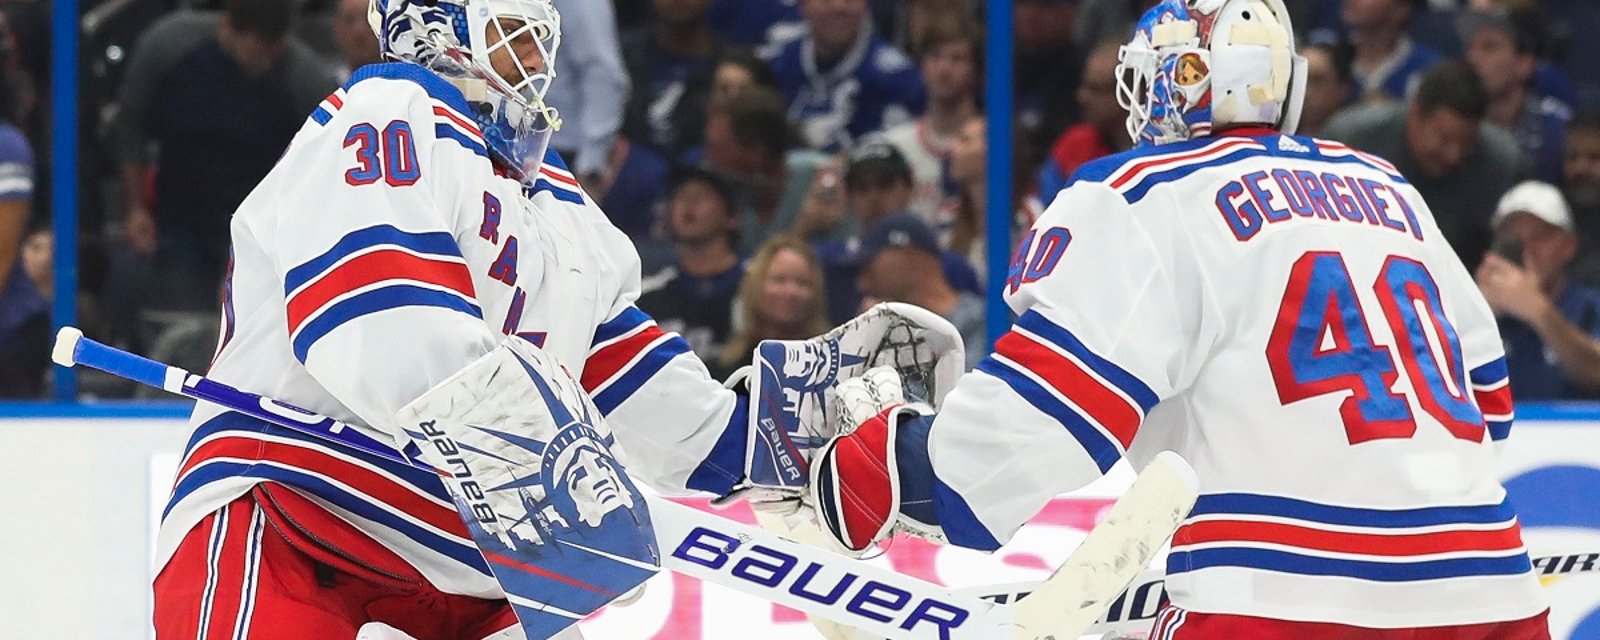 Insider hints at a big potential trade between the Maple Leafs and Rangers.